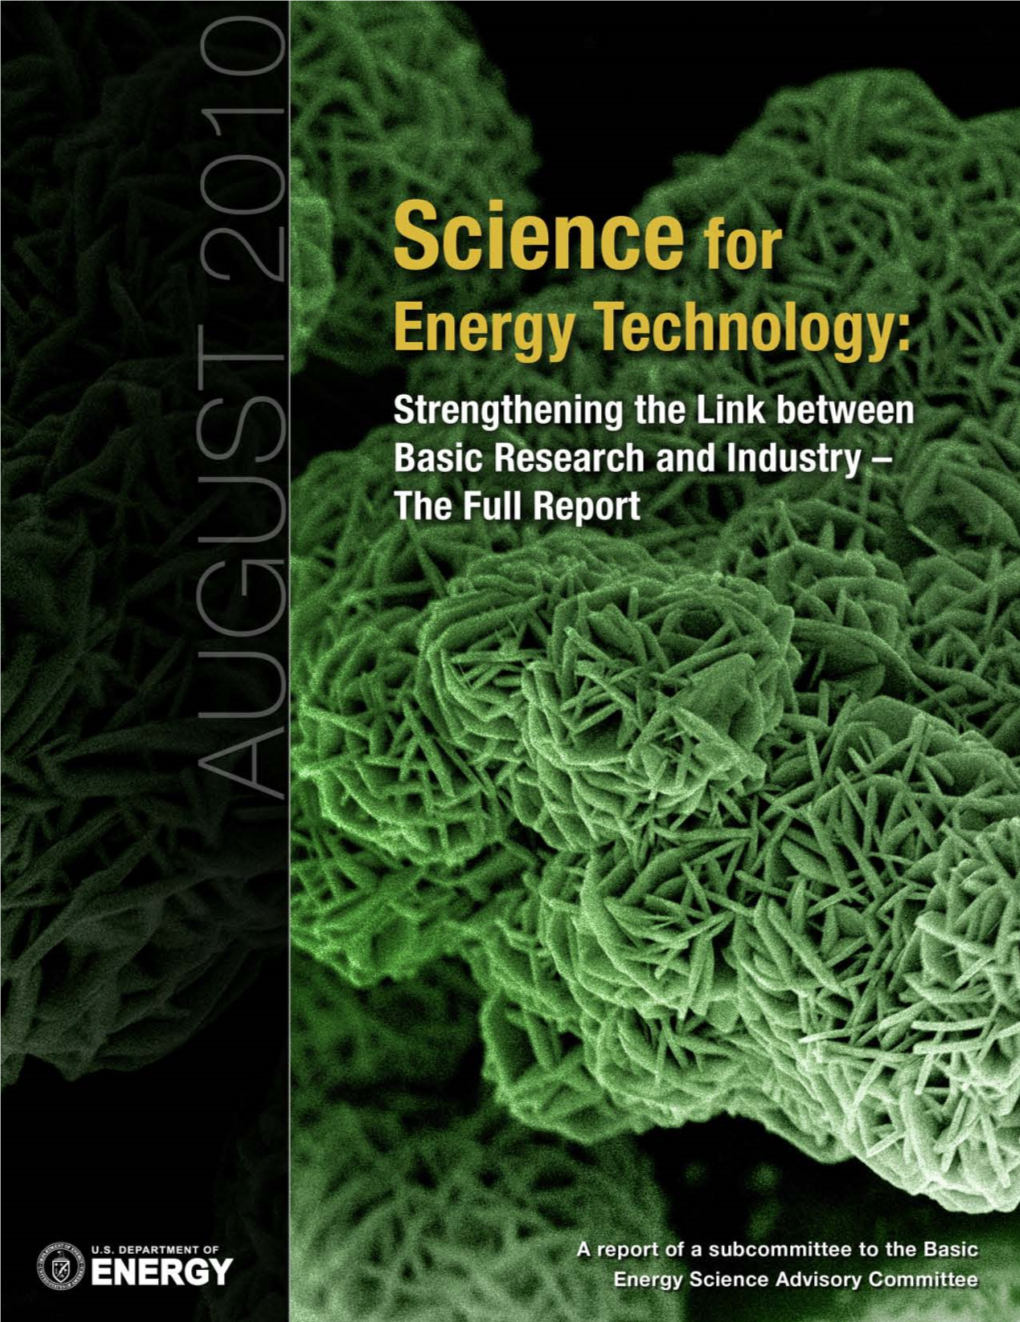 Science for Energy Technology: Stregthening the Link Between Basic Research and Industry